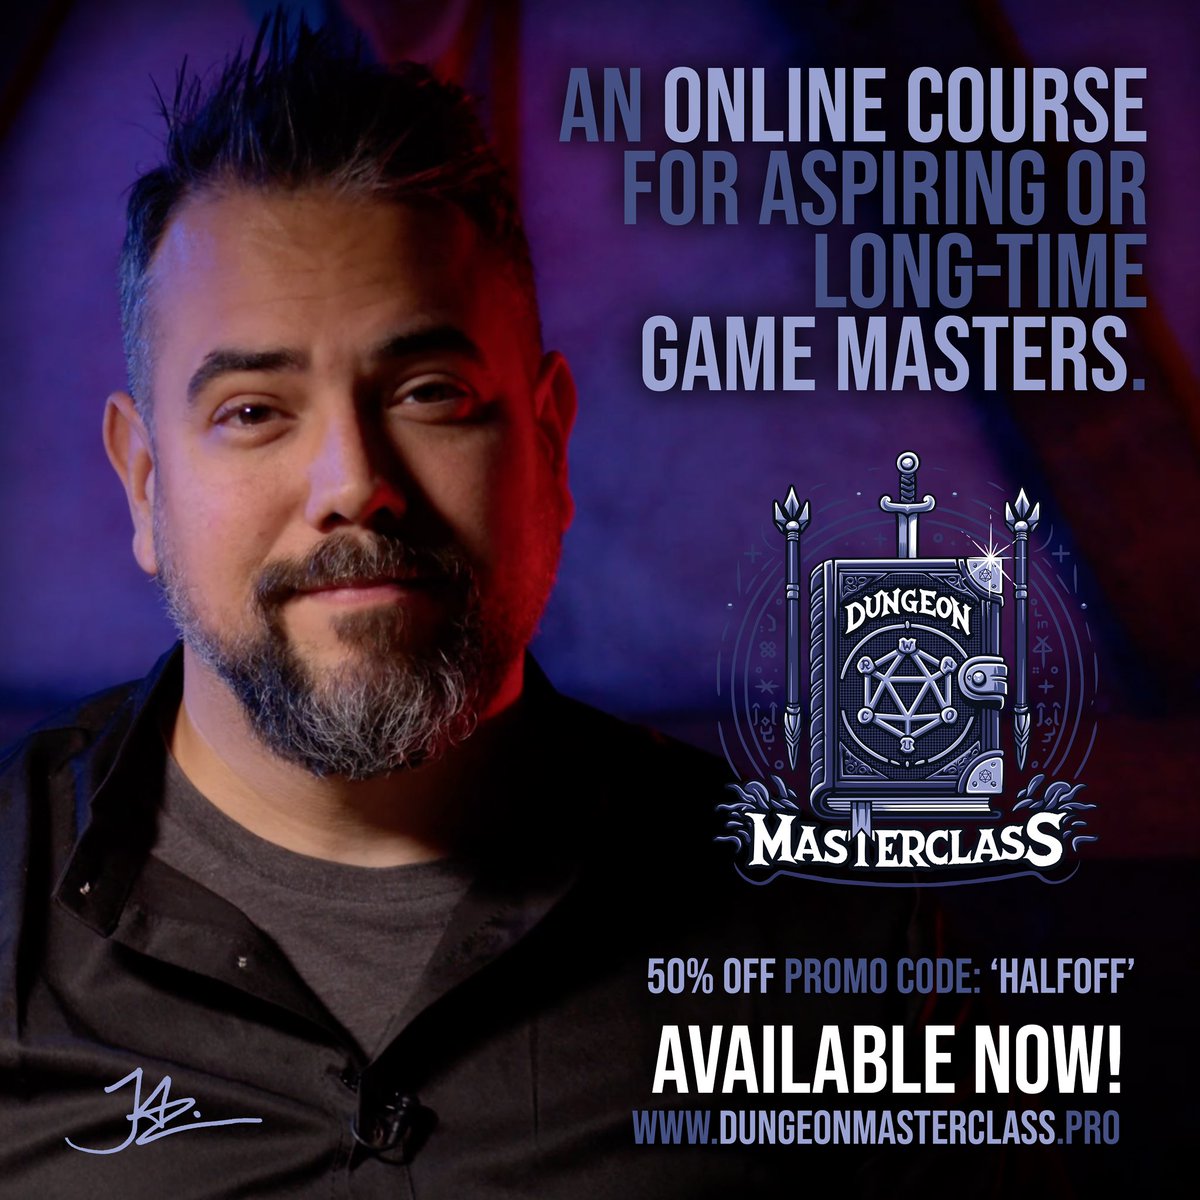 To celebrate the launch of my ONLINE GM COURSE we’re offering our community 50% off for a LIMITED TIME using promo code: HALFOFF. Watch the first 3 Lessons FREE dungeonmasterclass.pro #dnd #dungeonmaster #gamemaster #dungeonsanddragons #dungeonmastertips #dungeonmasterlife